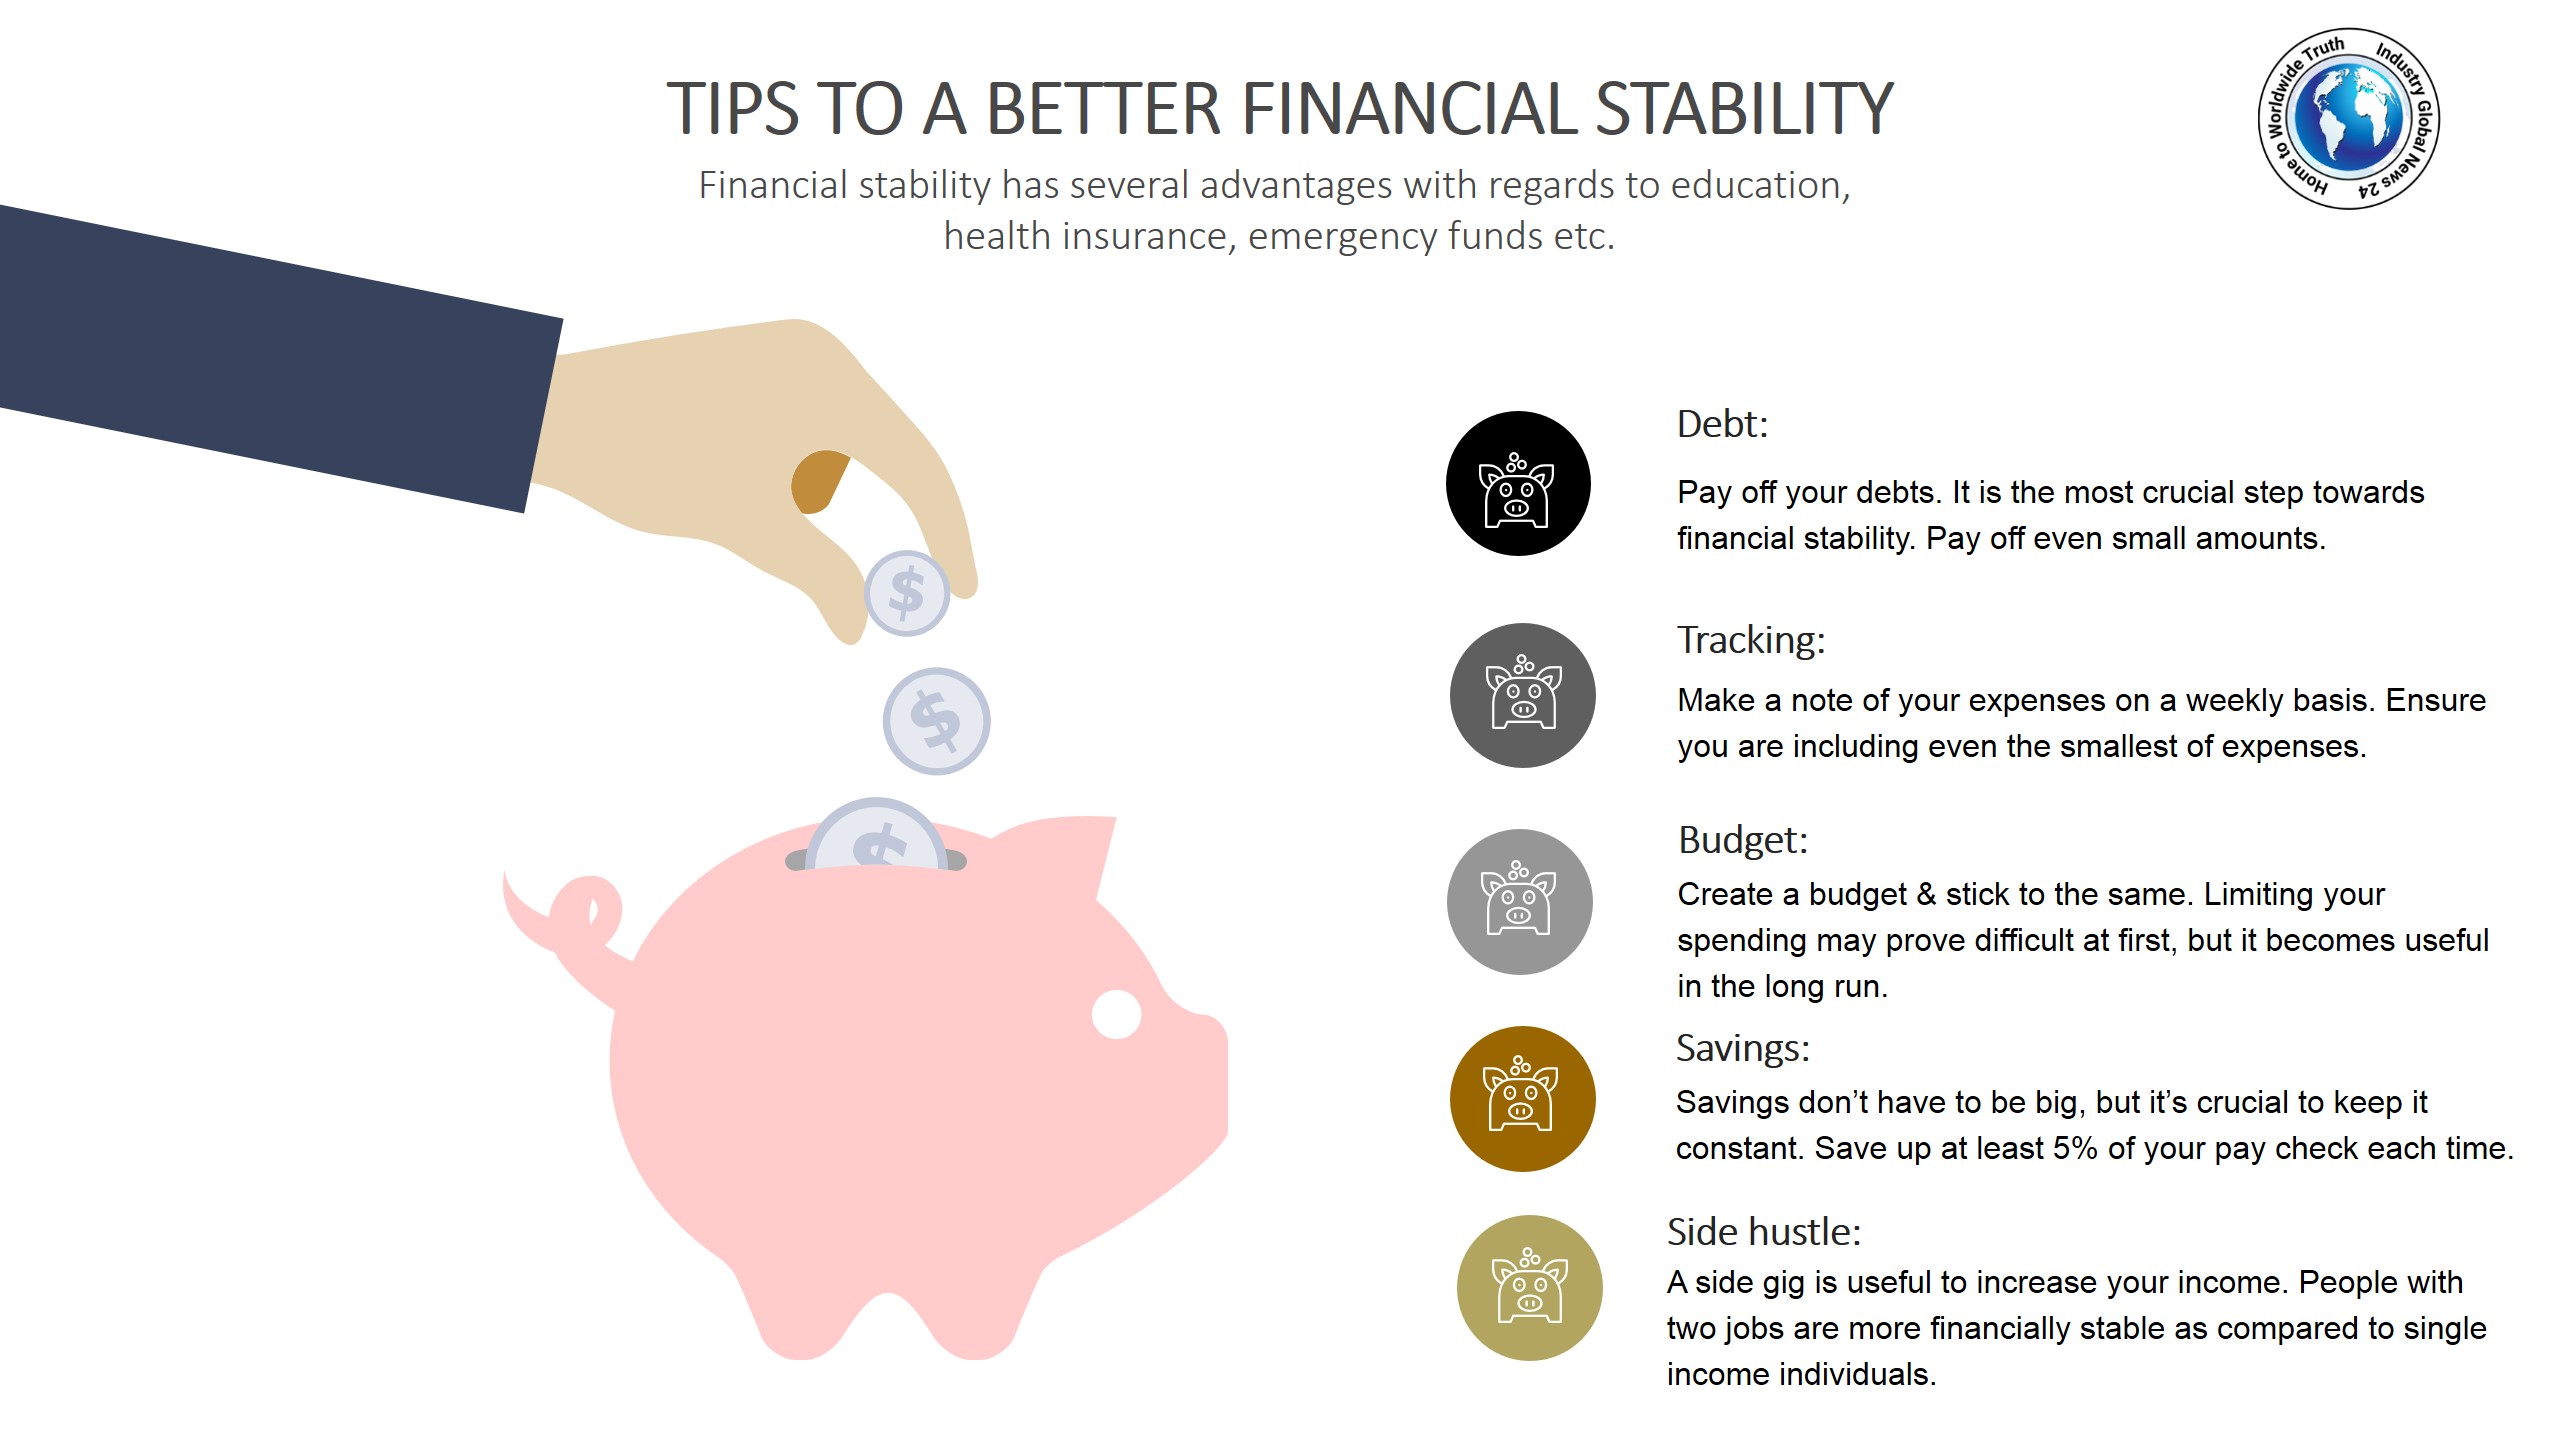 Tips to a better financial stability